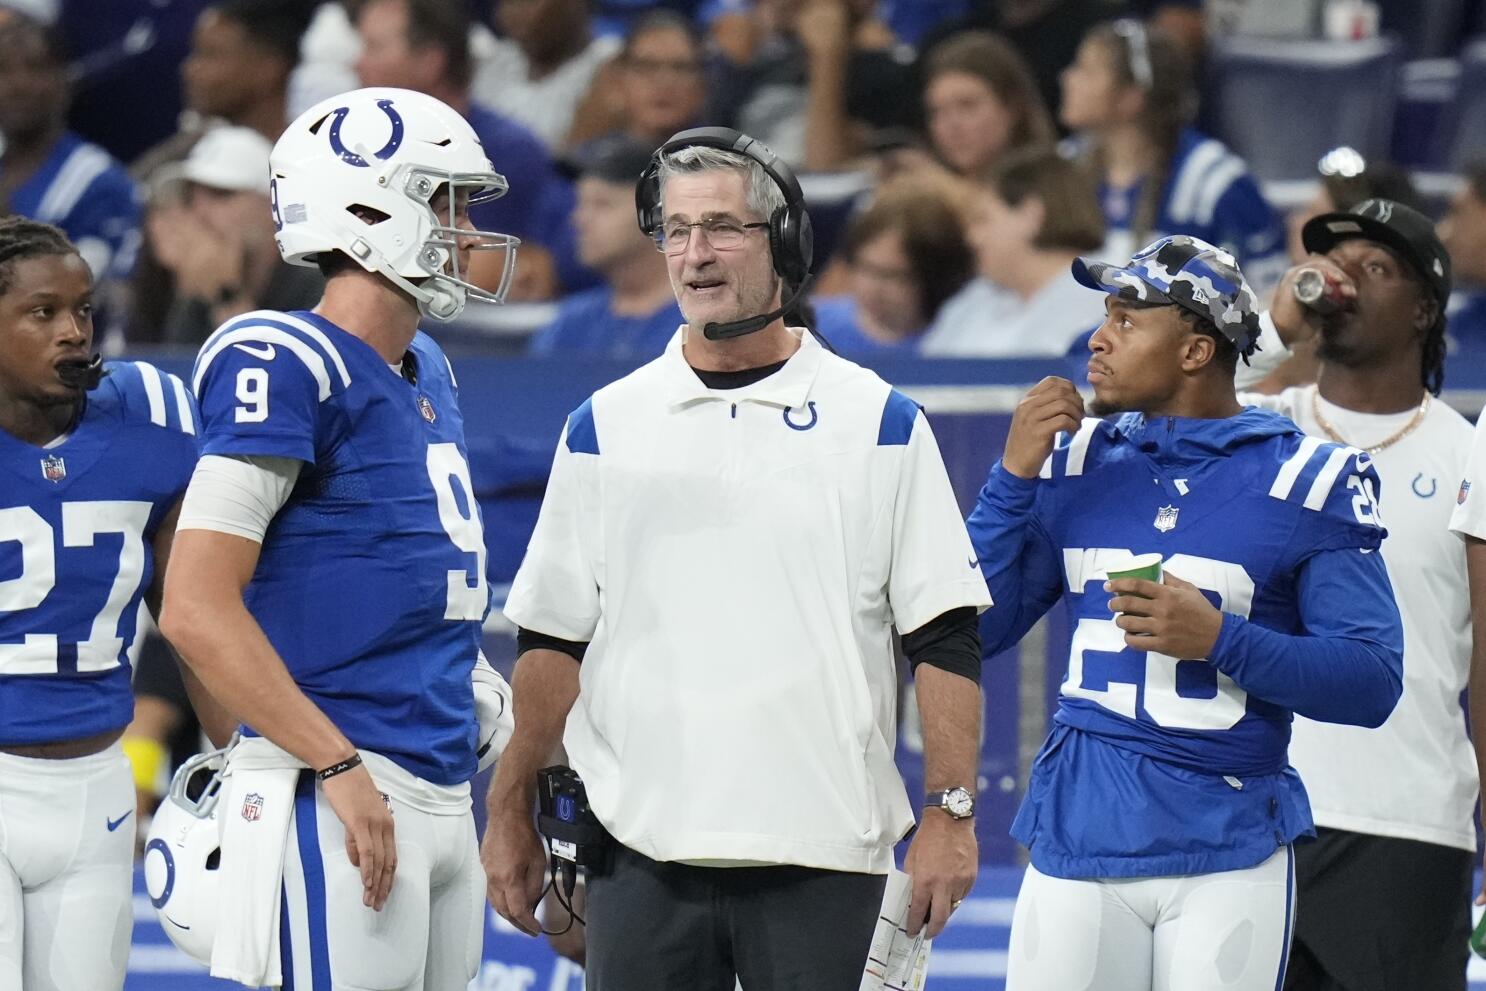 Colts hoping to find answer to 8-game opening day skid - The San